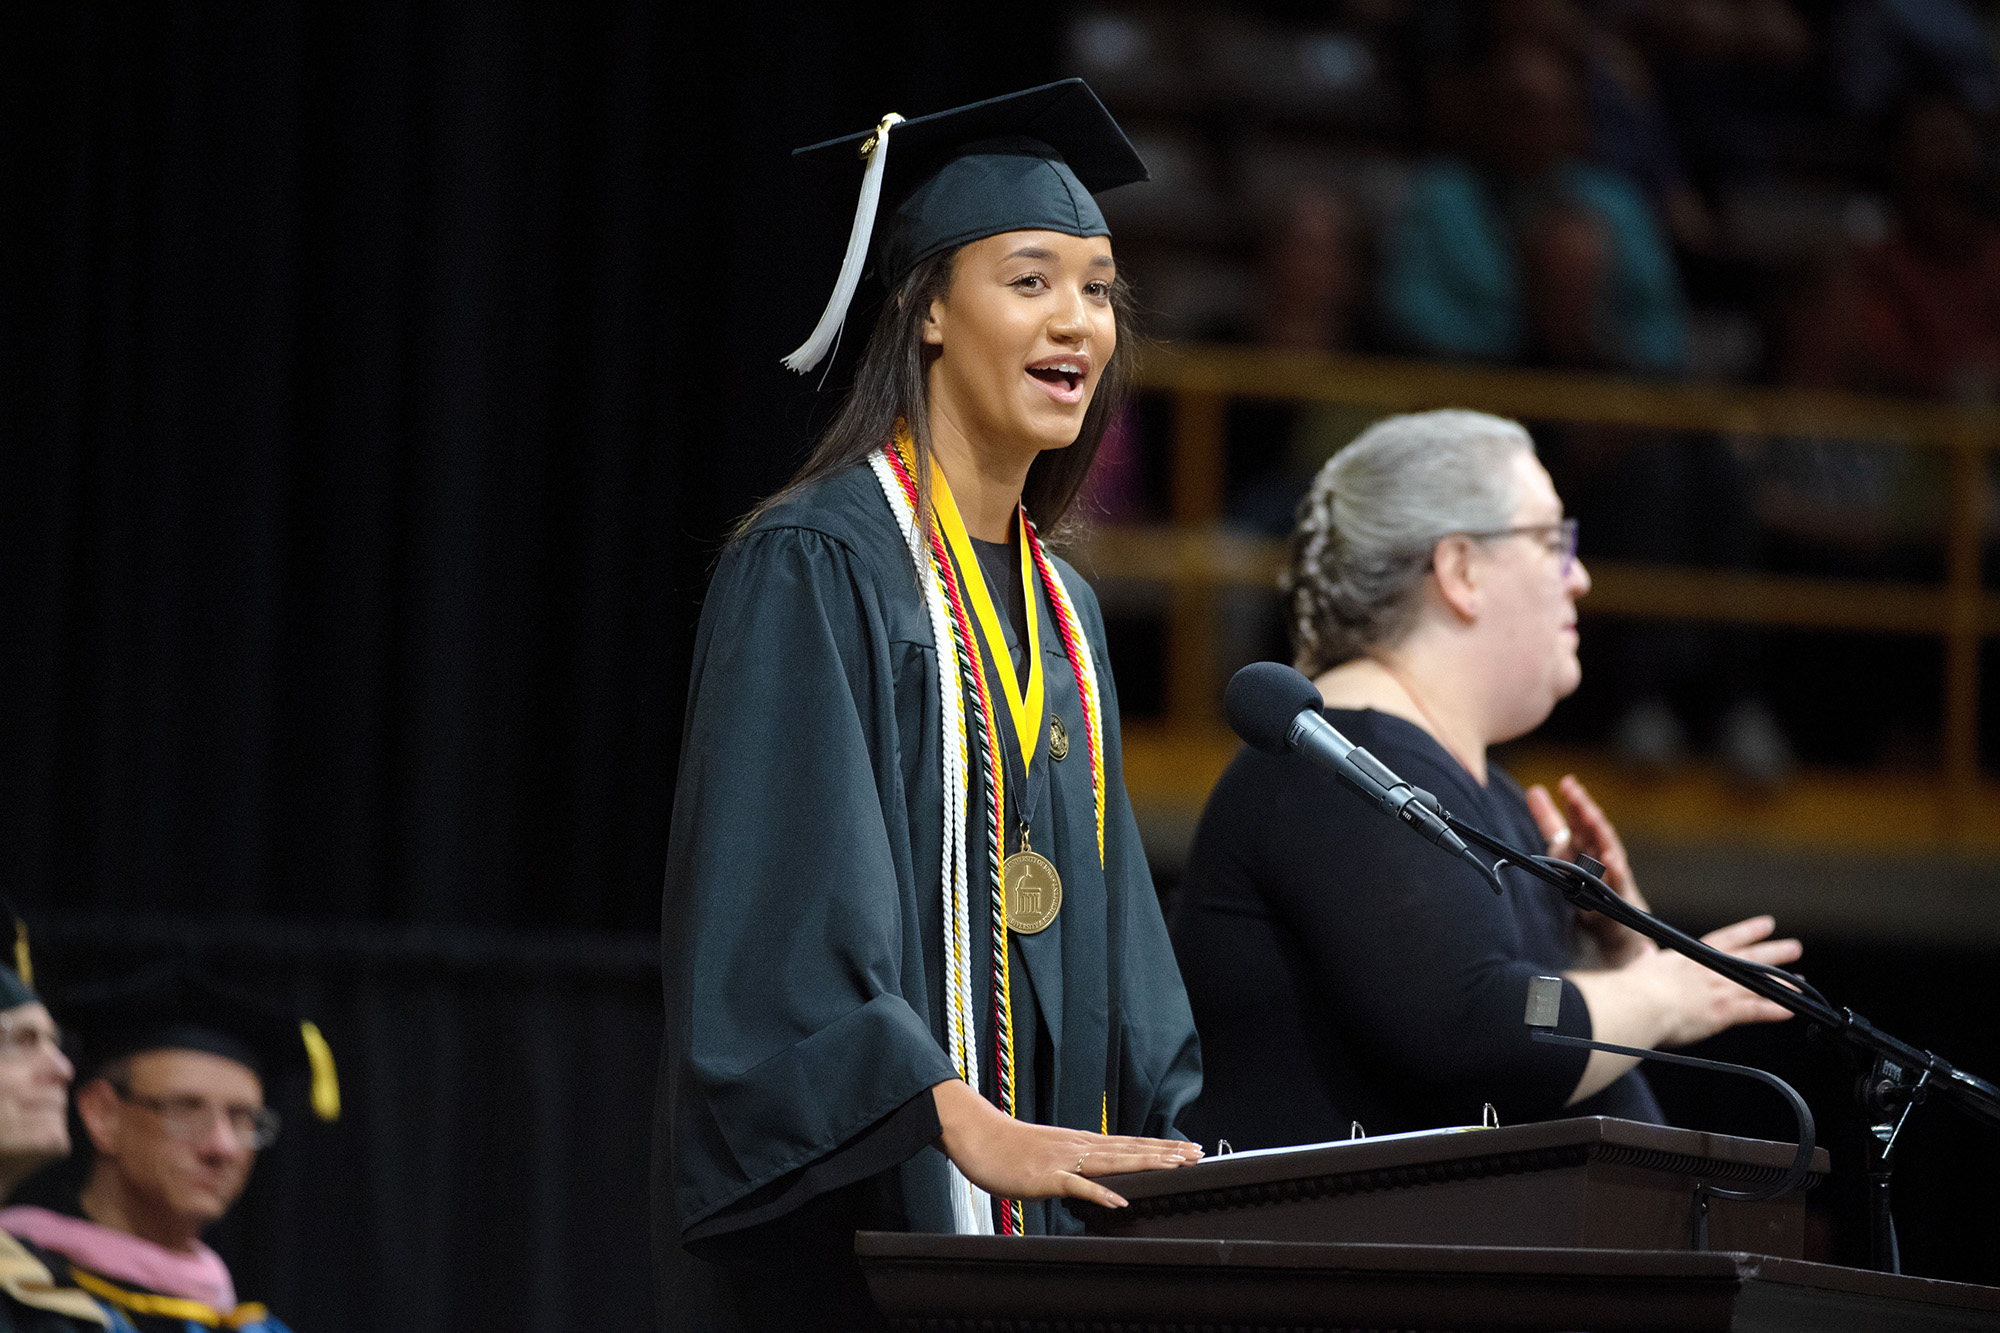 Kimmi Chex, in cap and gown, stands at a podium delivering a commencement speech.